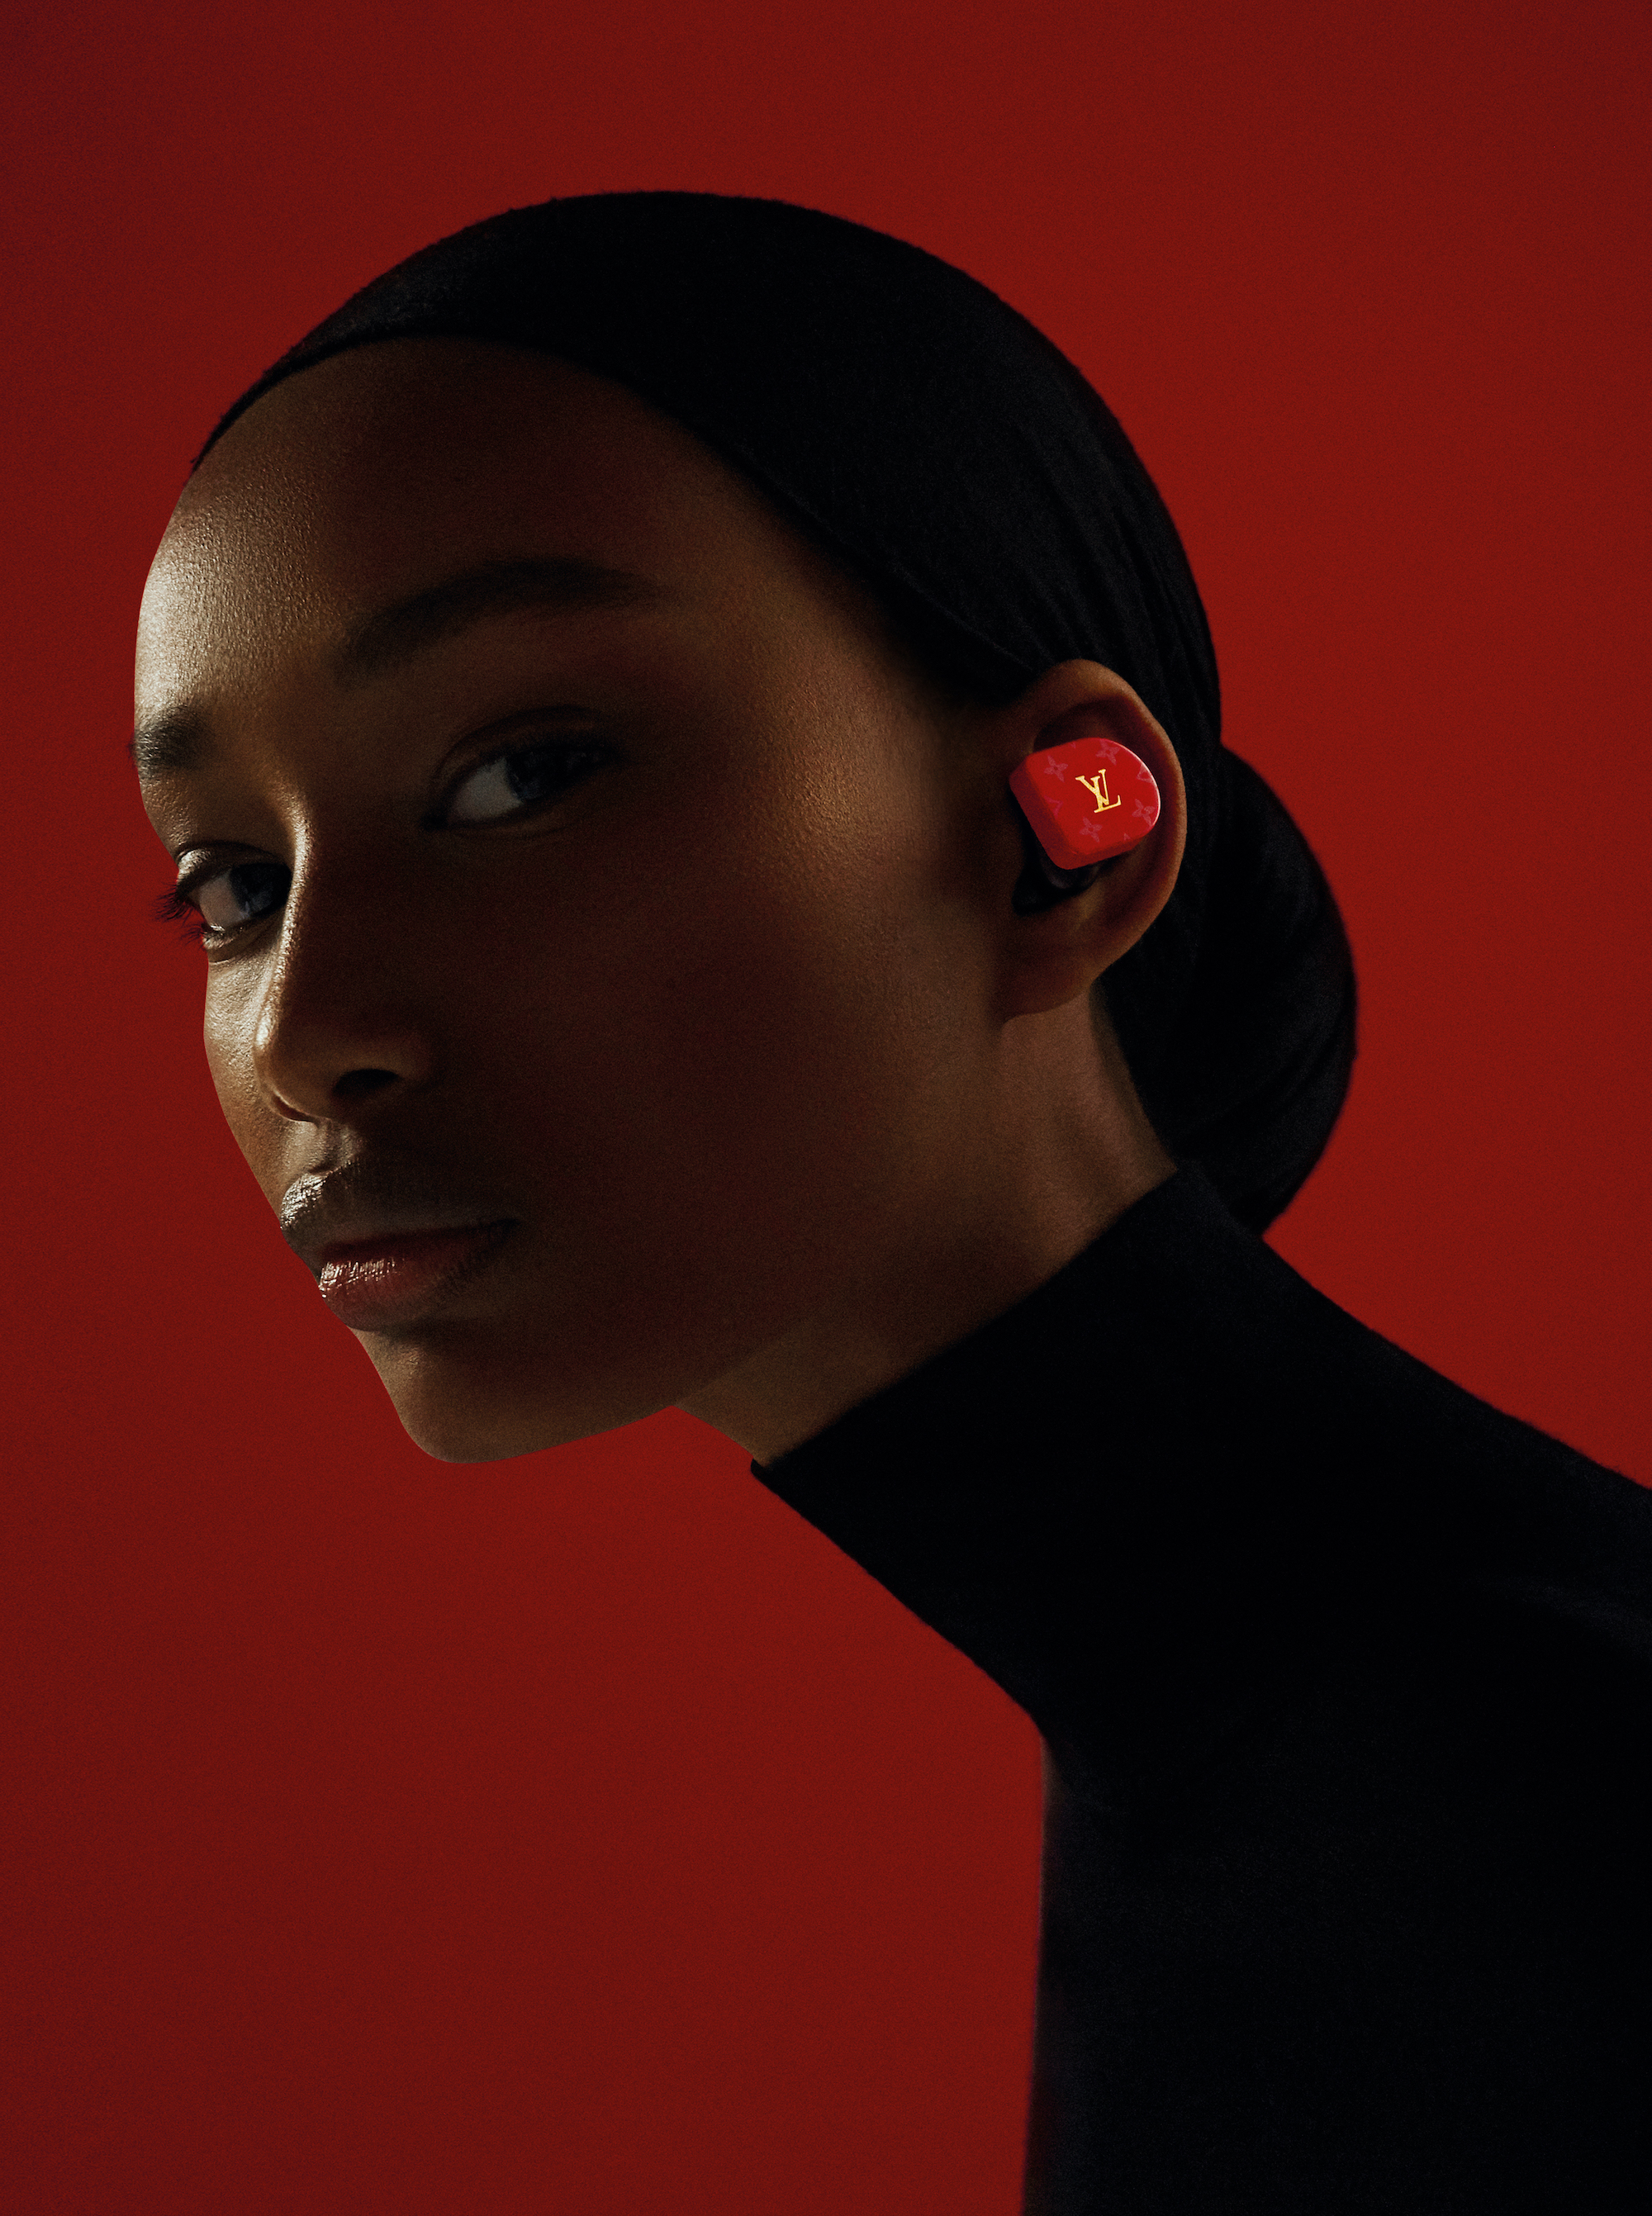  When they took off earlier this year, Louis Vuitton's first wireless earphone buds dropped the mic on today's cordless craze. Even in the vertiginous tech cycle, this elegant range of in-ear styles, from gold-on-white to red hot, pries screen-addicted gazes upward. Seen here on the season's most captivating new face, Ugbad, the earphones have been met with a chorus of fanfare thanks to their sleek color codes, everlasting battery life and aspirational price point. These antidotes to Apple-induced sameness are the forbidden fruit of the future. Louis Vuitton Horizon Red Monogram earphones ($995, available at select Louis Vuitton stores).